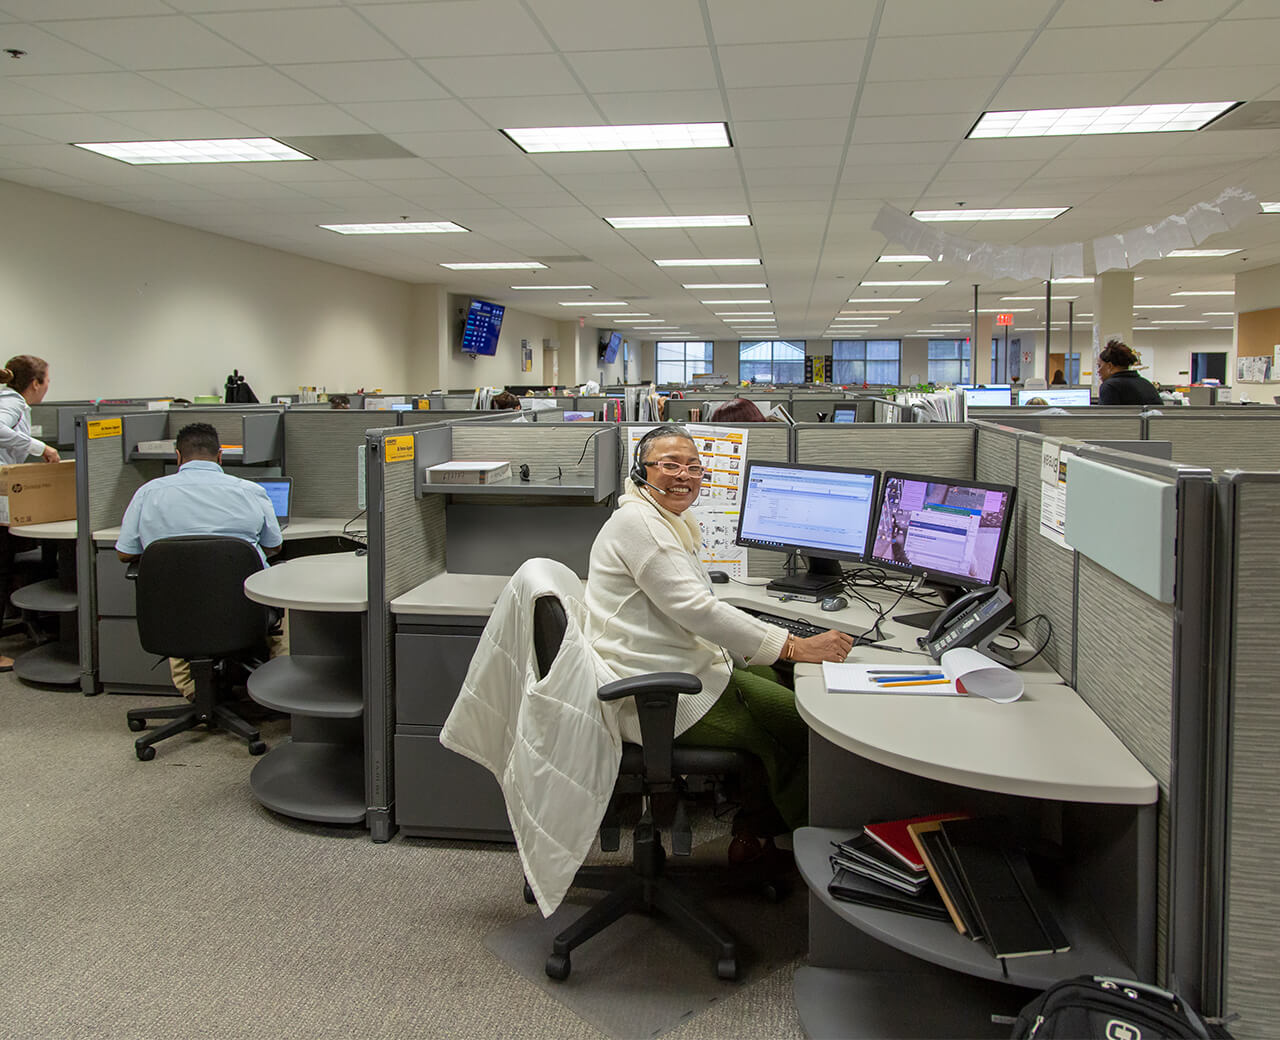 HD Supply employees in a shared office environment